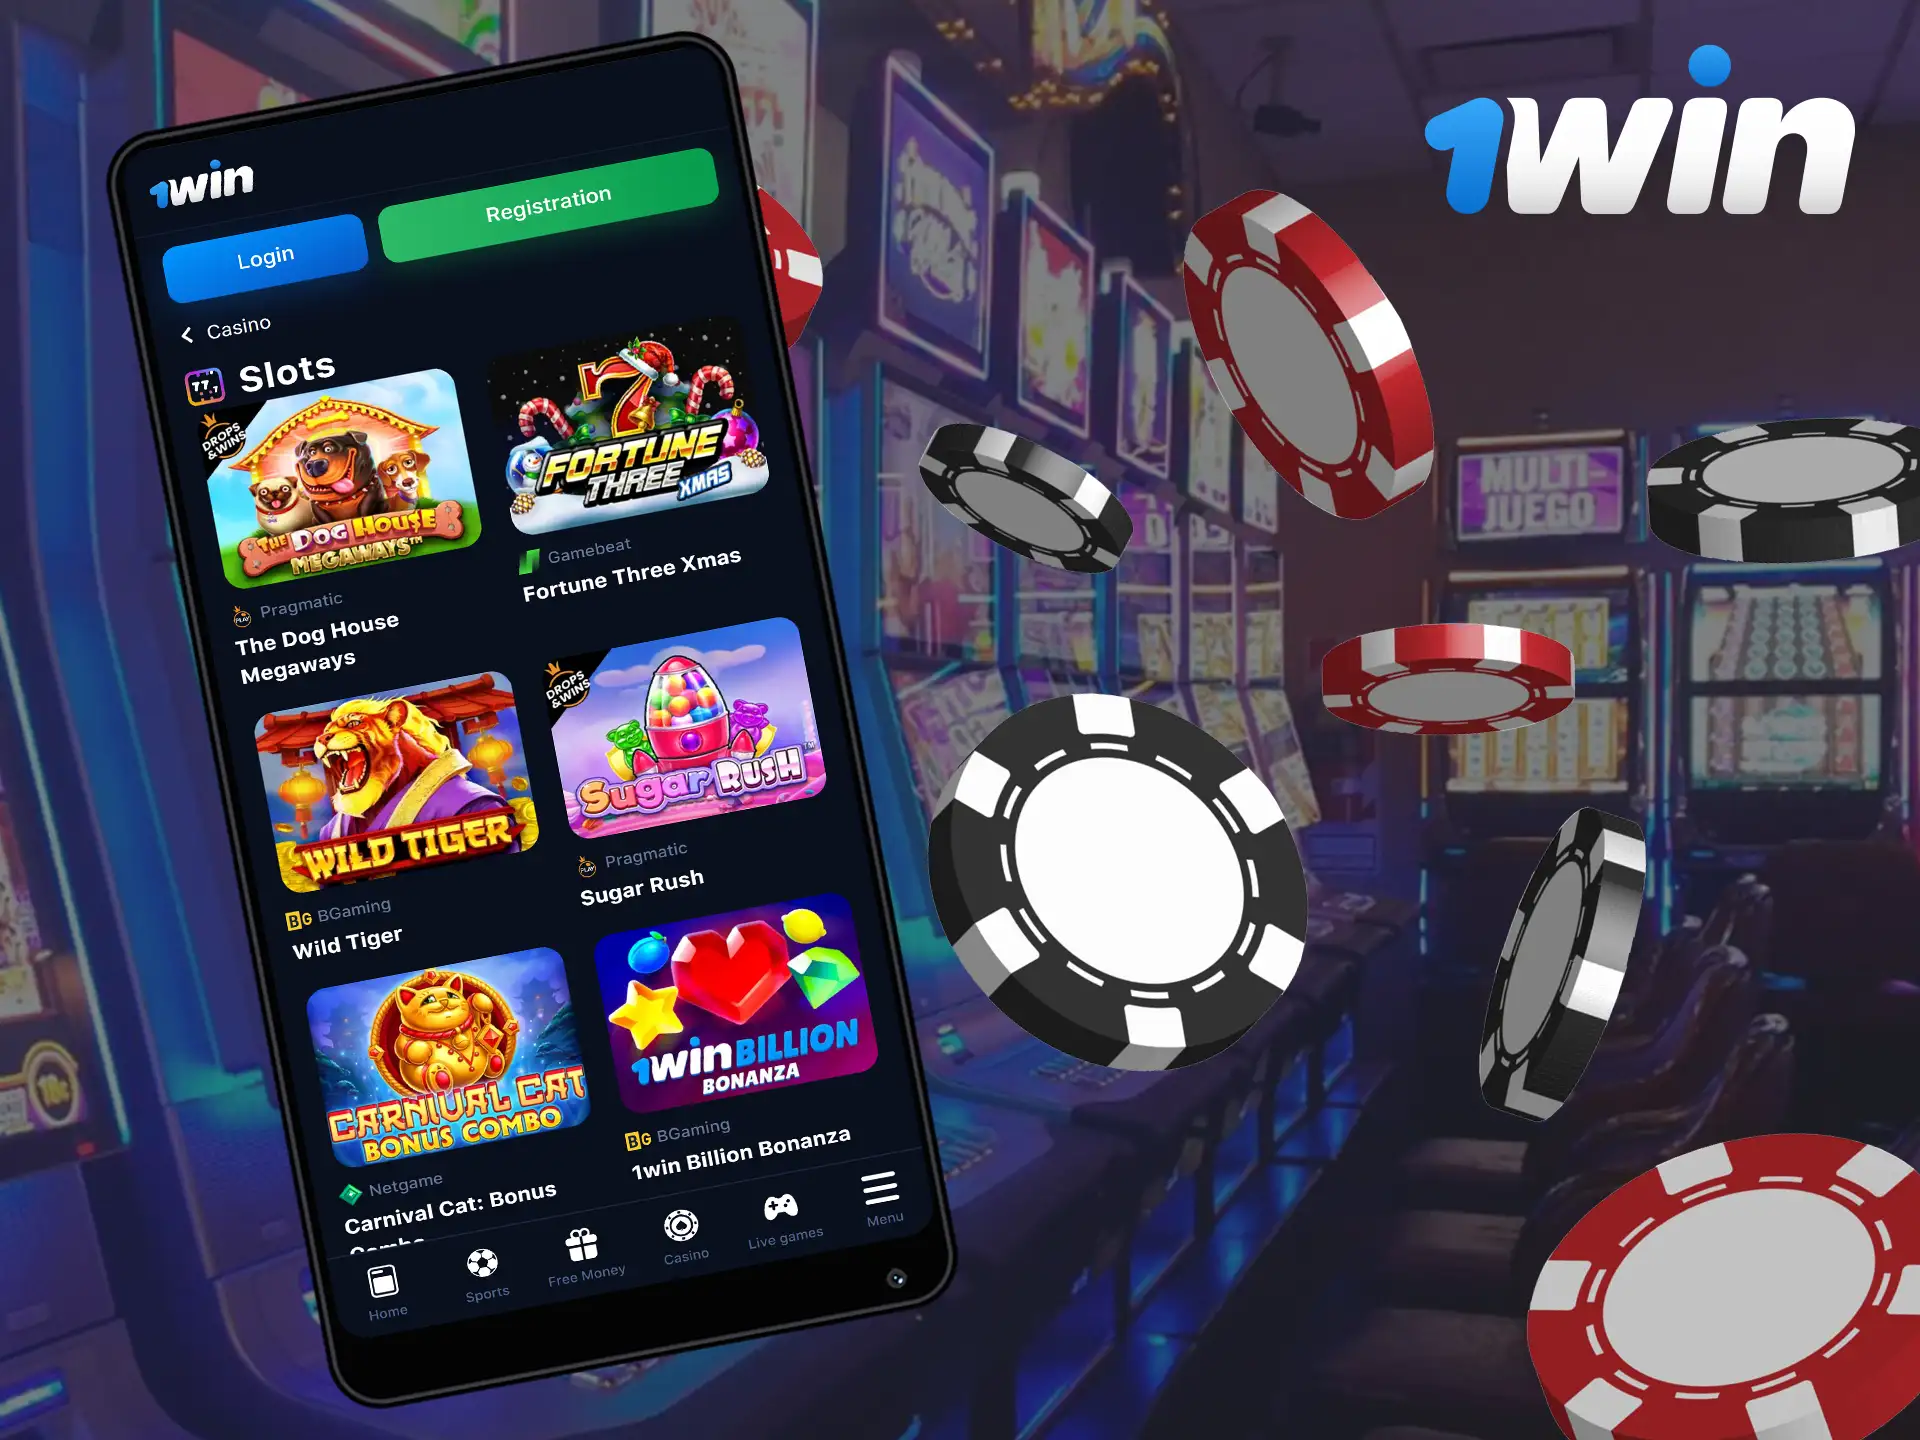 A wide variety of games with different themes and styles are available to play on the 1Win mobile app.